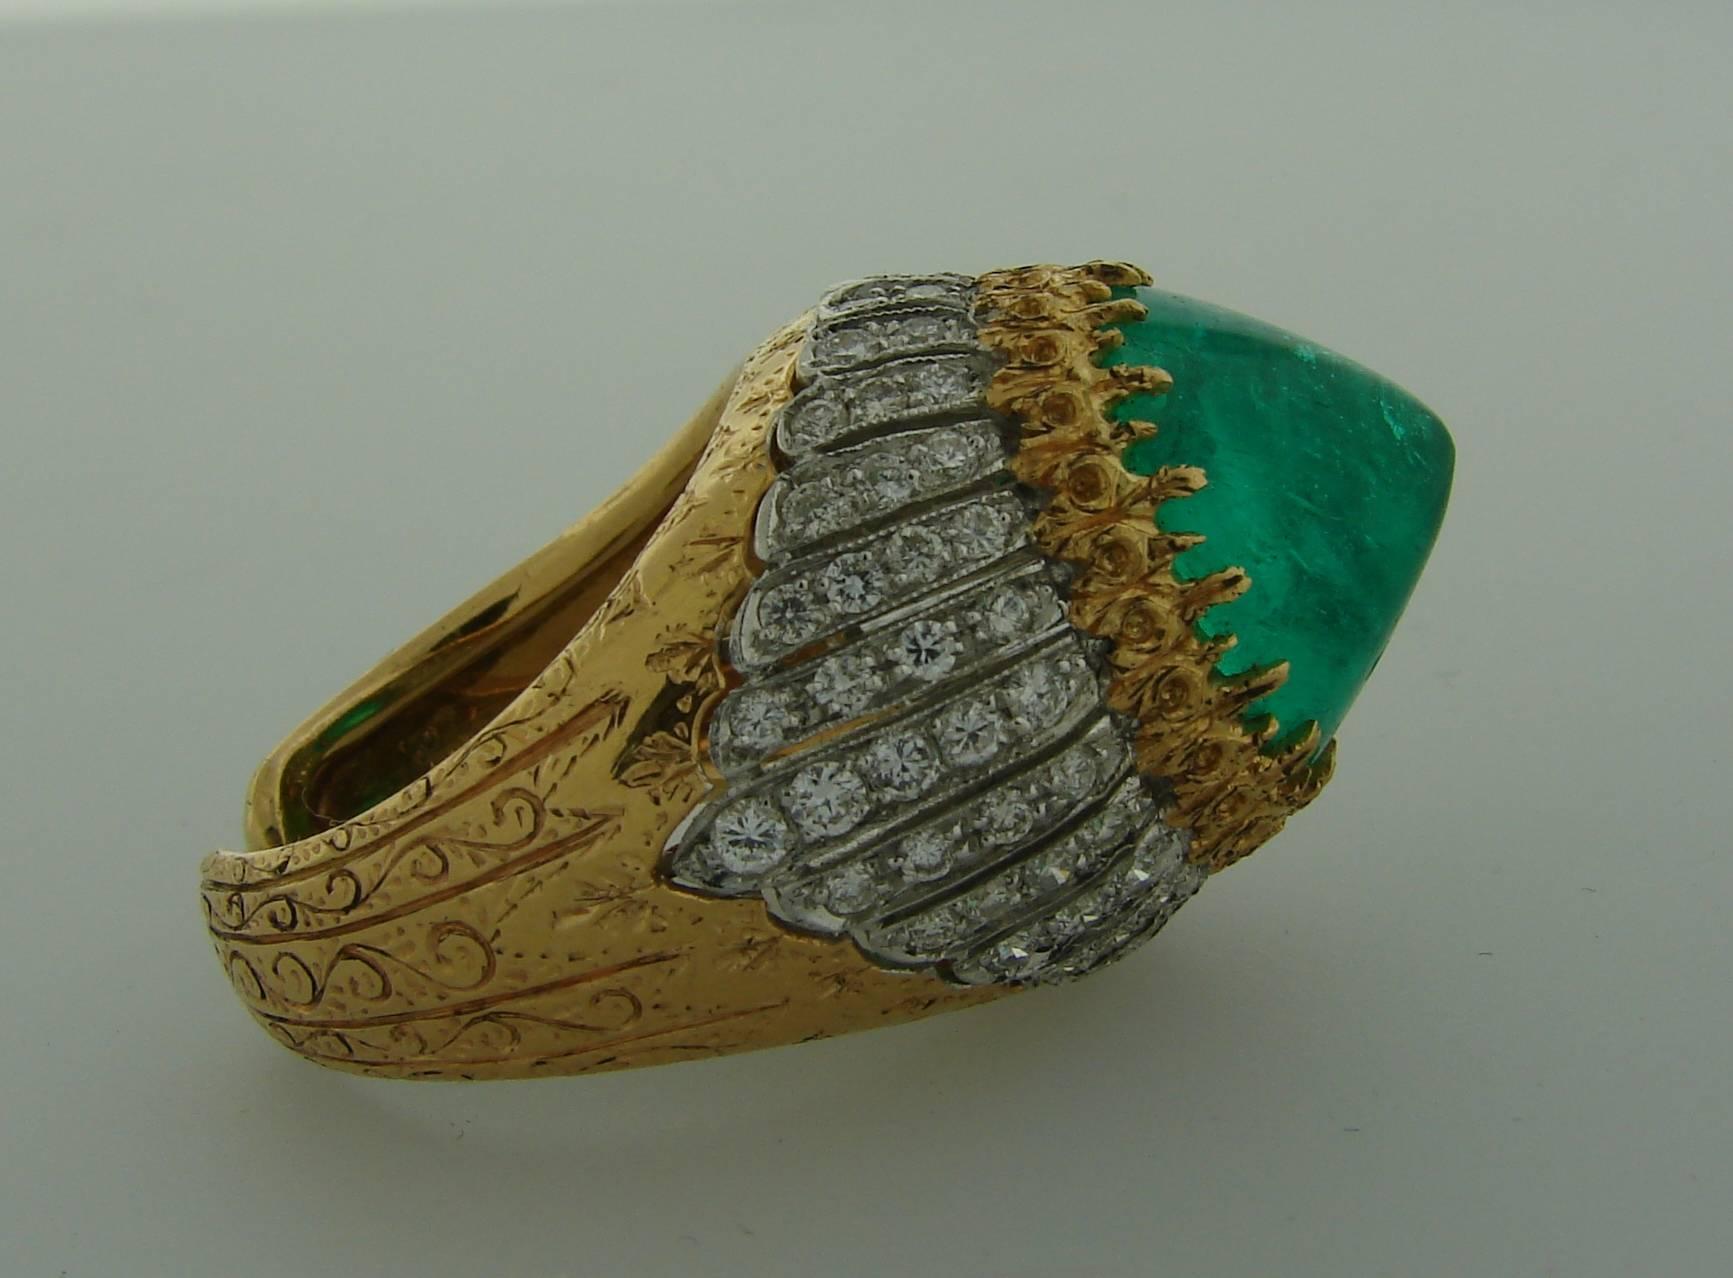 Stunning cocktail ring created by Buccellati in Italy in the 1970's. Features a gorgeous over 10-carat sugarloaf emerald set in 18k yellow gold and accented with 84 round brilliant cut diamonds set in 18k white gold. Beautiful detailed work on gold.